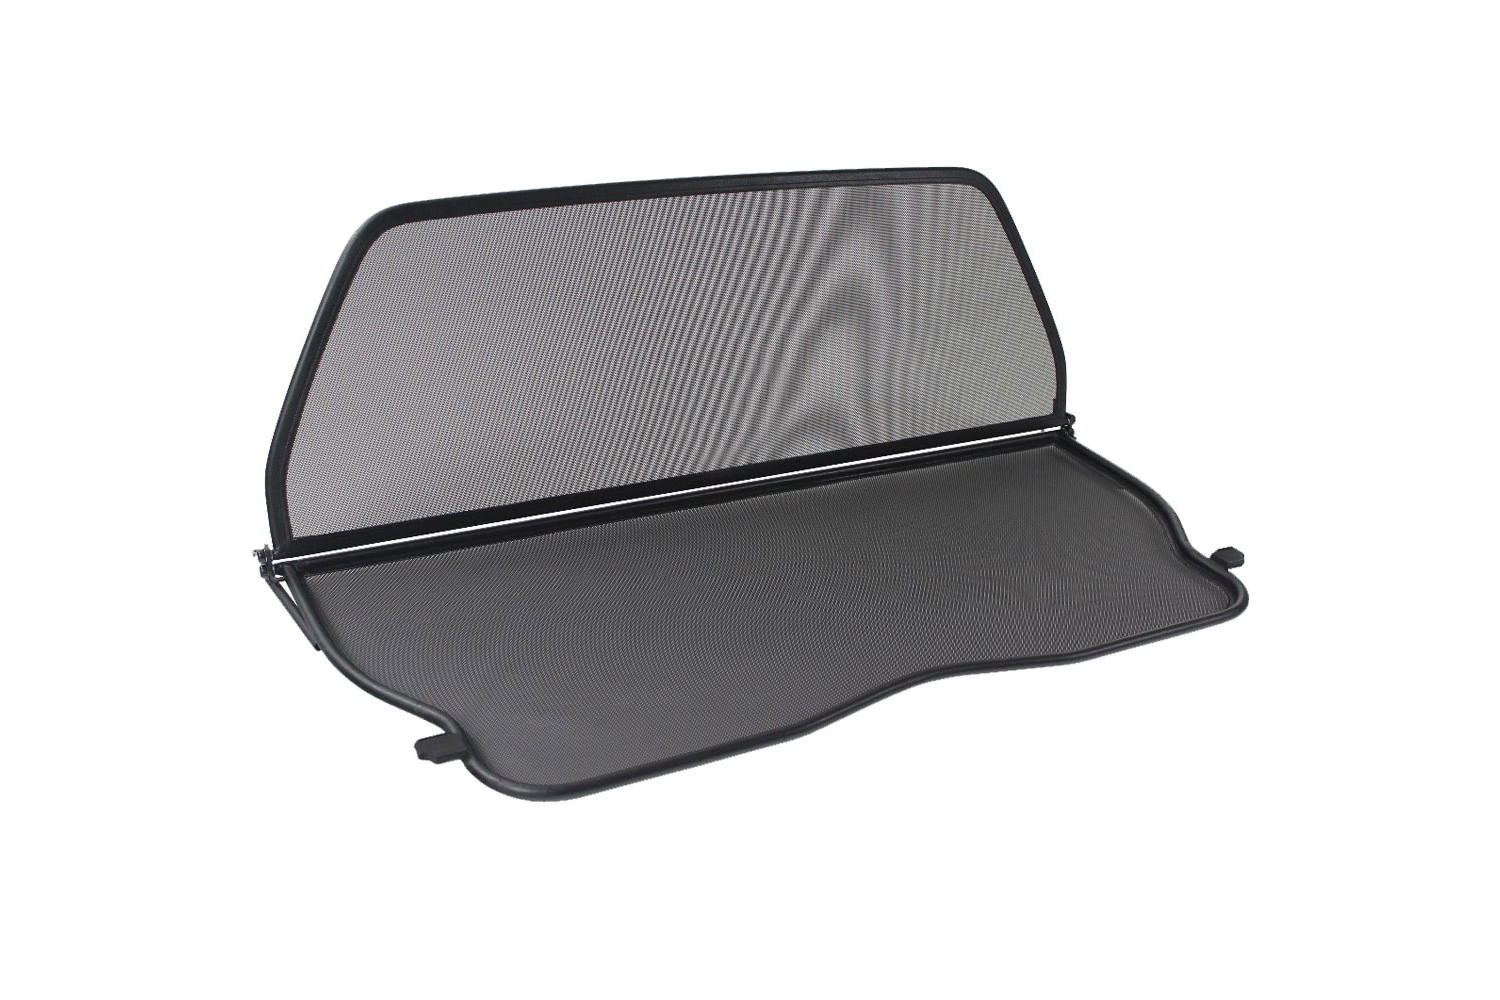 Wind deflector suitable for BMW 3 Series Cabriolet (E30) 1982-1990 Black